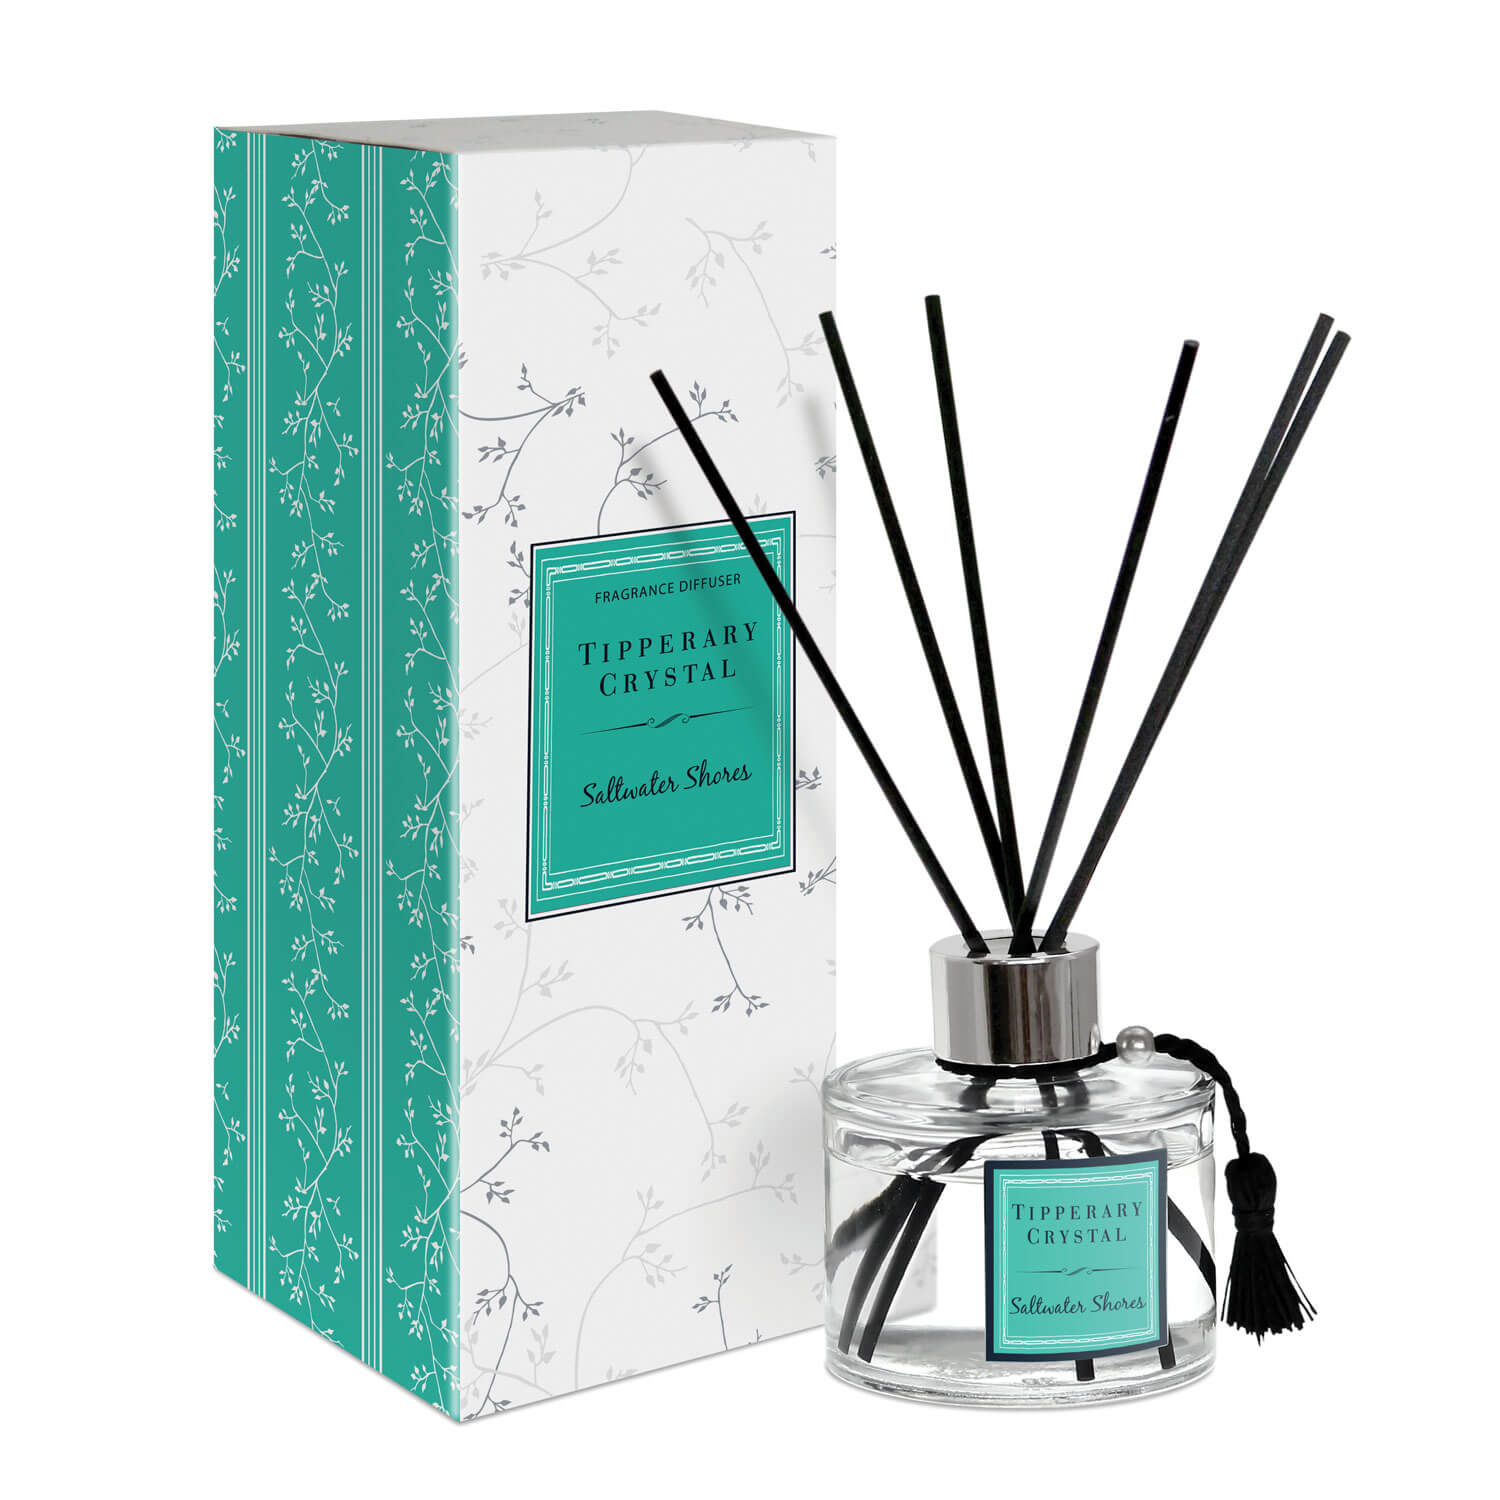 Tipperary Crystal Saltwater Shores Diffuser 1 Shaws Department Stores